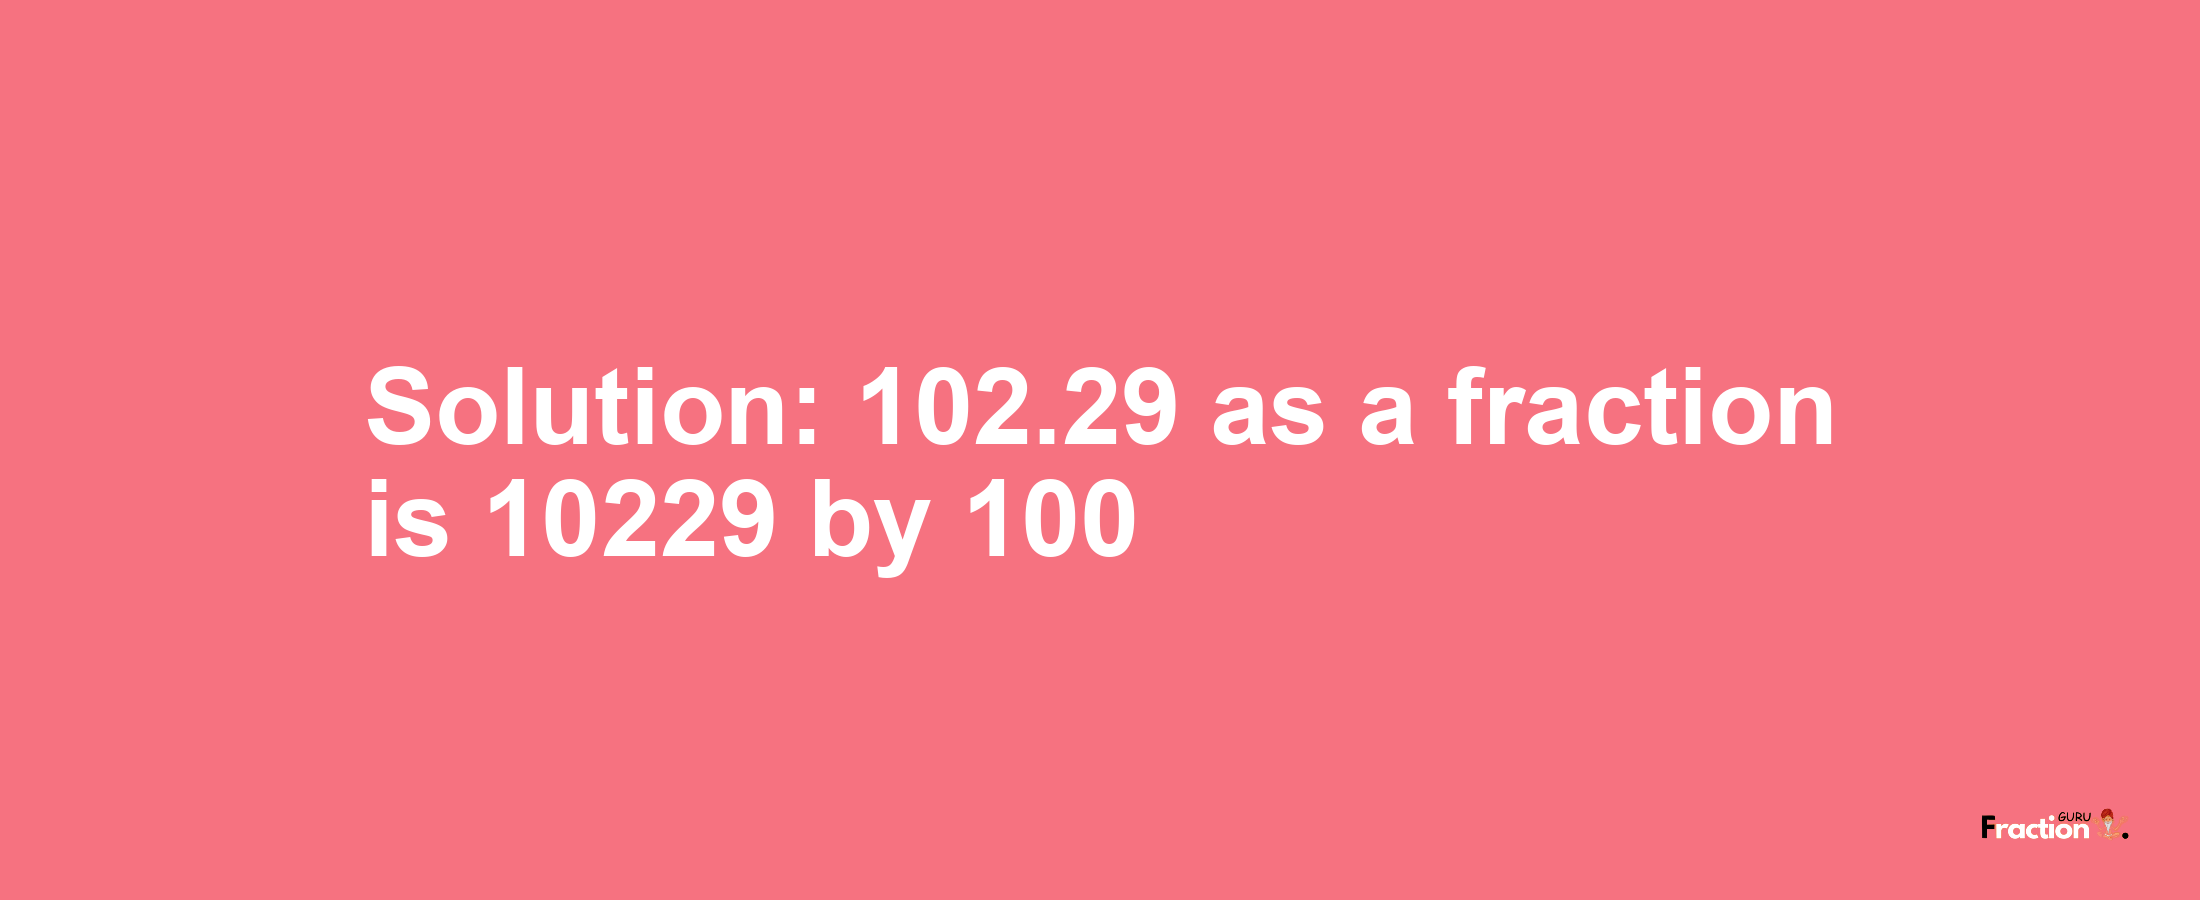 Solution:102.29 as a fraction is 10229/100